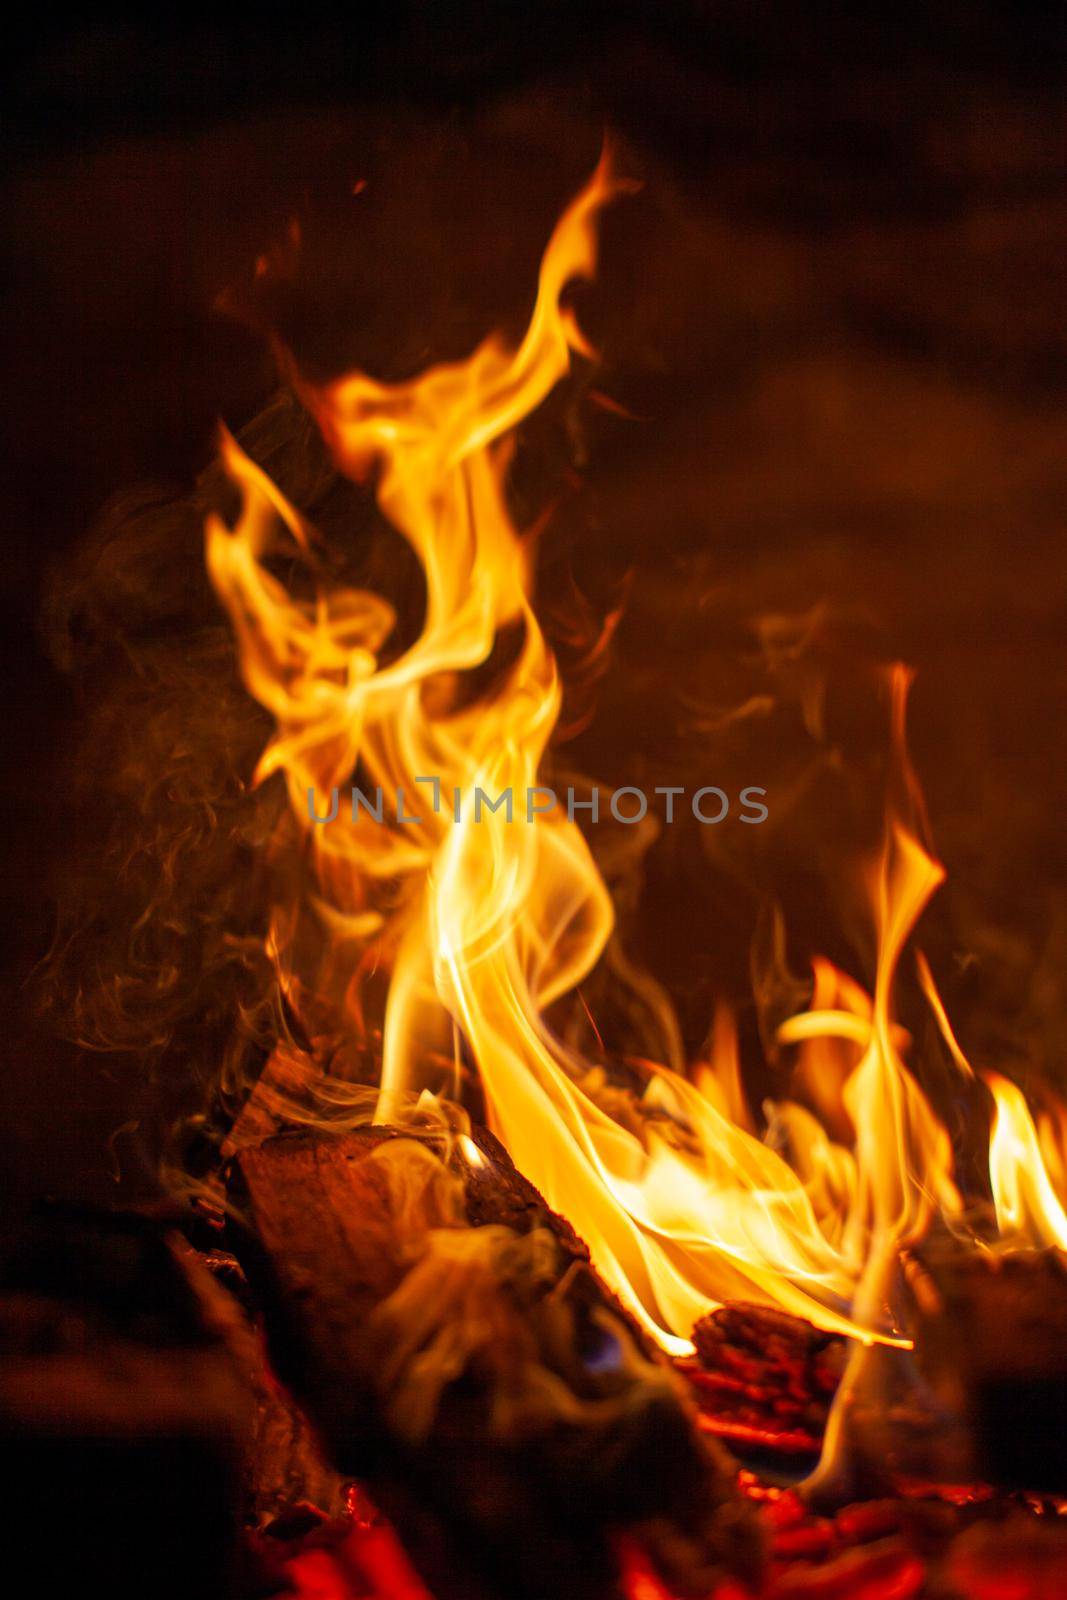 A campfire burns in the snow at night in the snow in the cold winter. The flame of the fire warms and illuminates. Flame, background